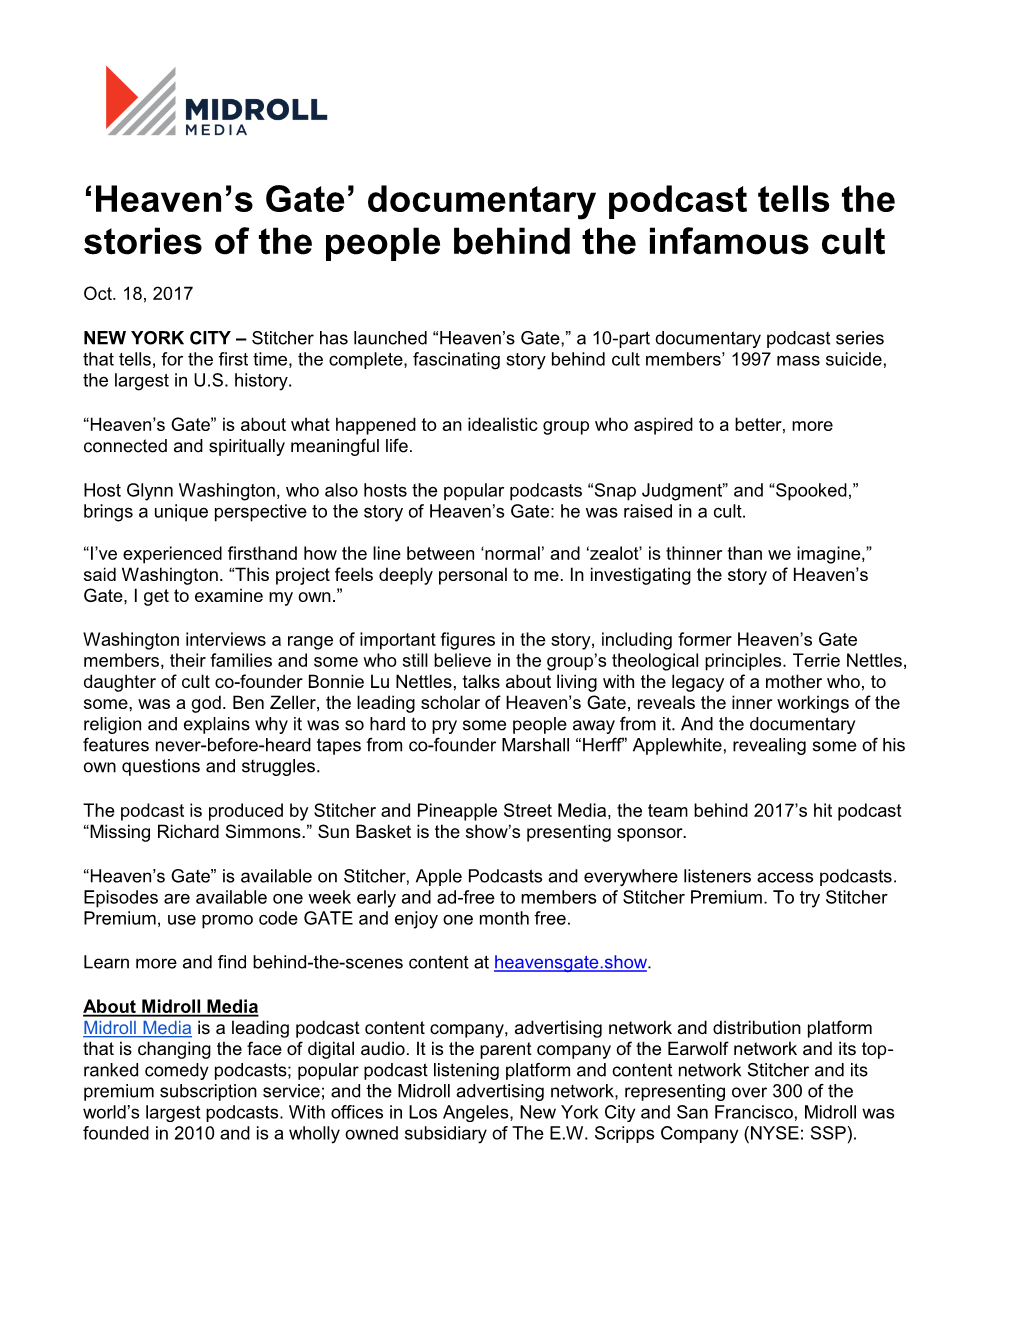 'Heaven's Gate' Documentary Podcast Tells the Stories of the People